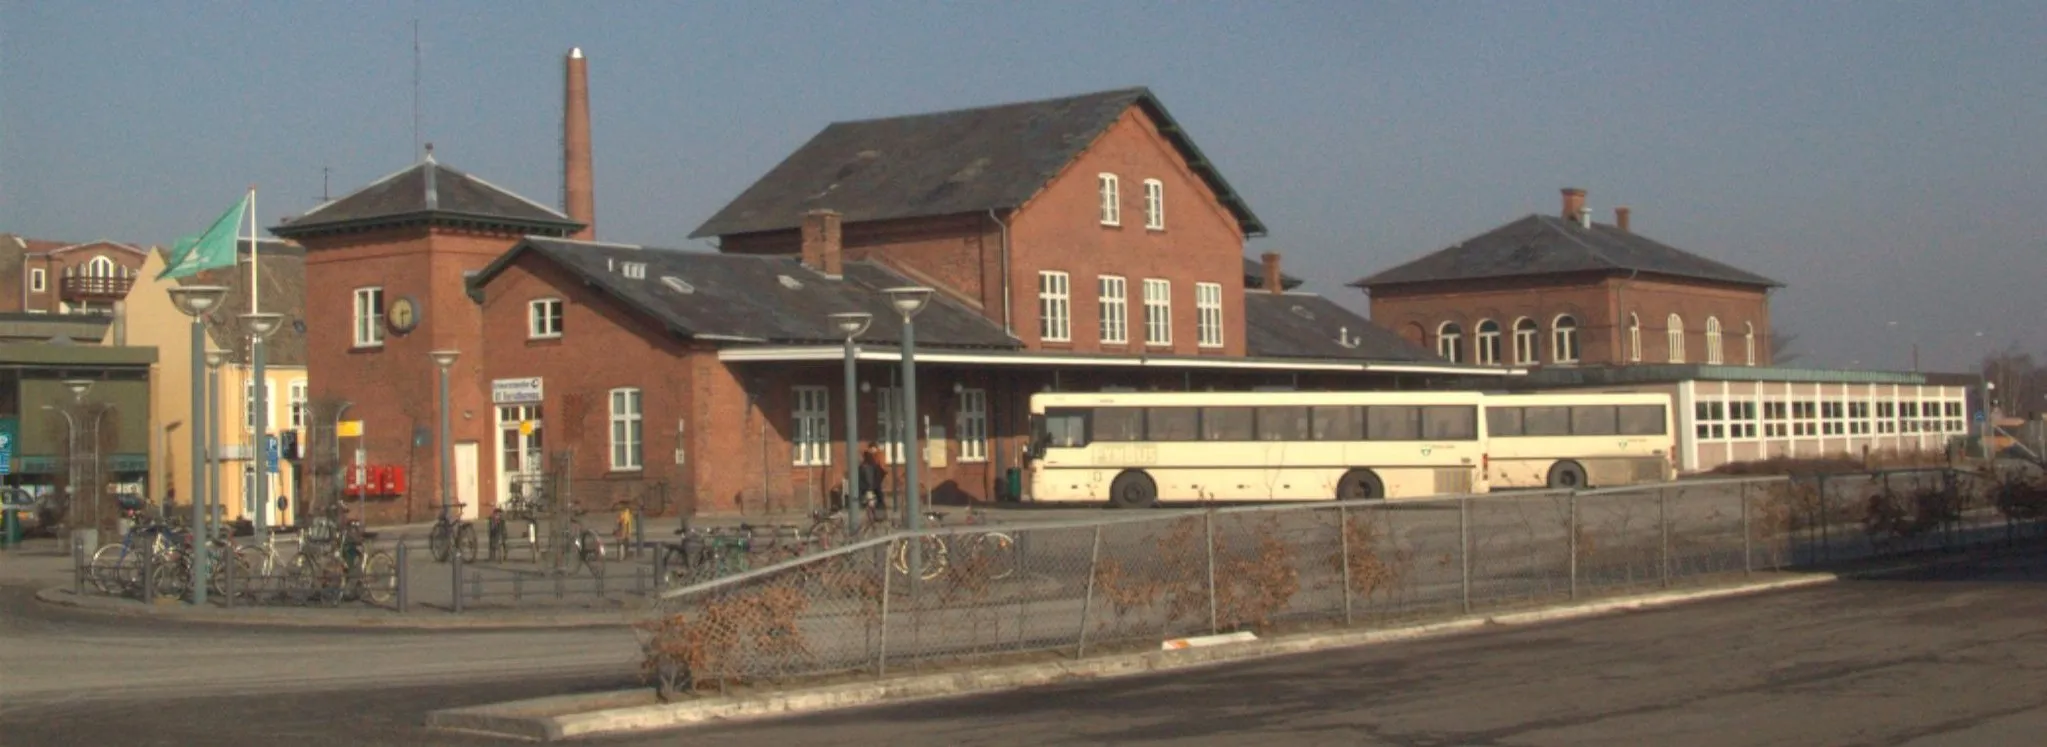 Photo showing: The former railroad station in Fåborg, Funen, Denmark.  It is now a bus station.